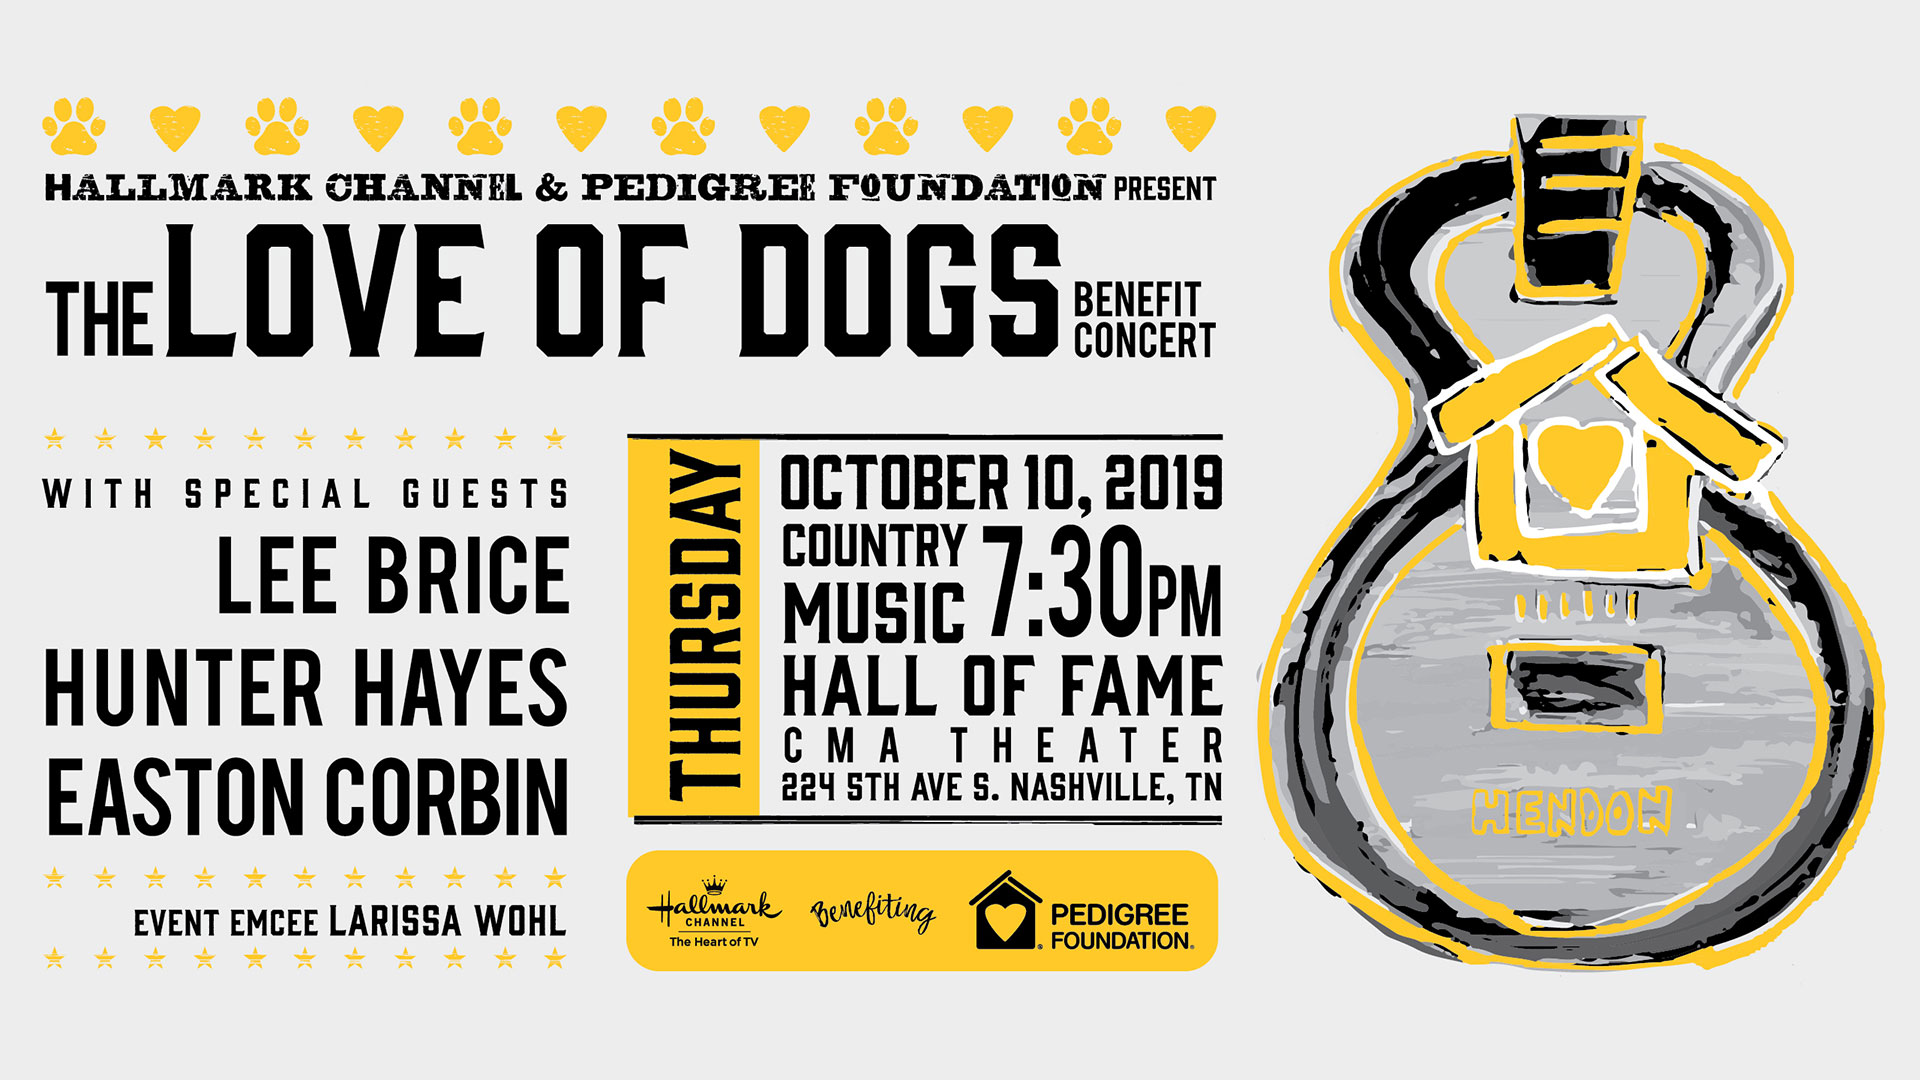 The Love of Dogs concert poster with details